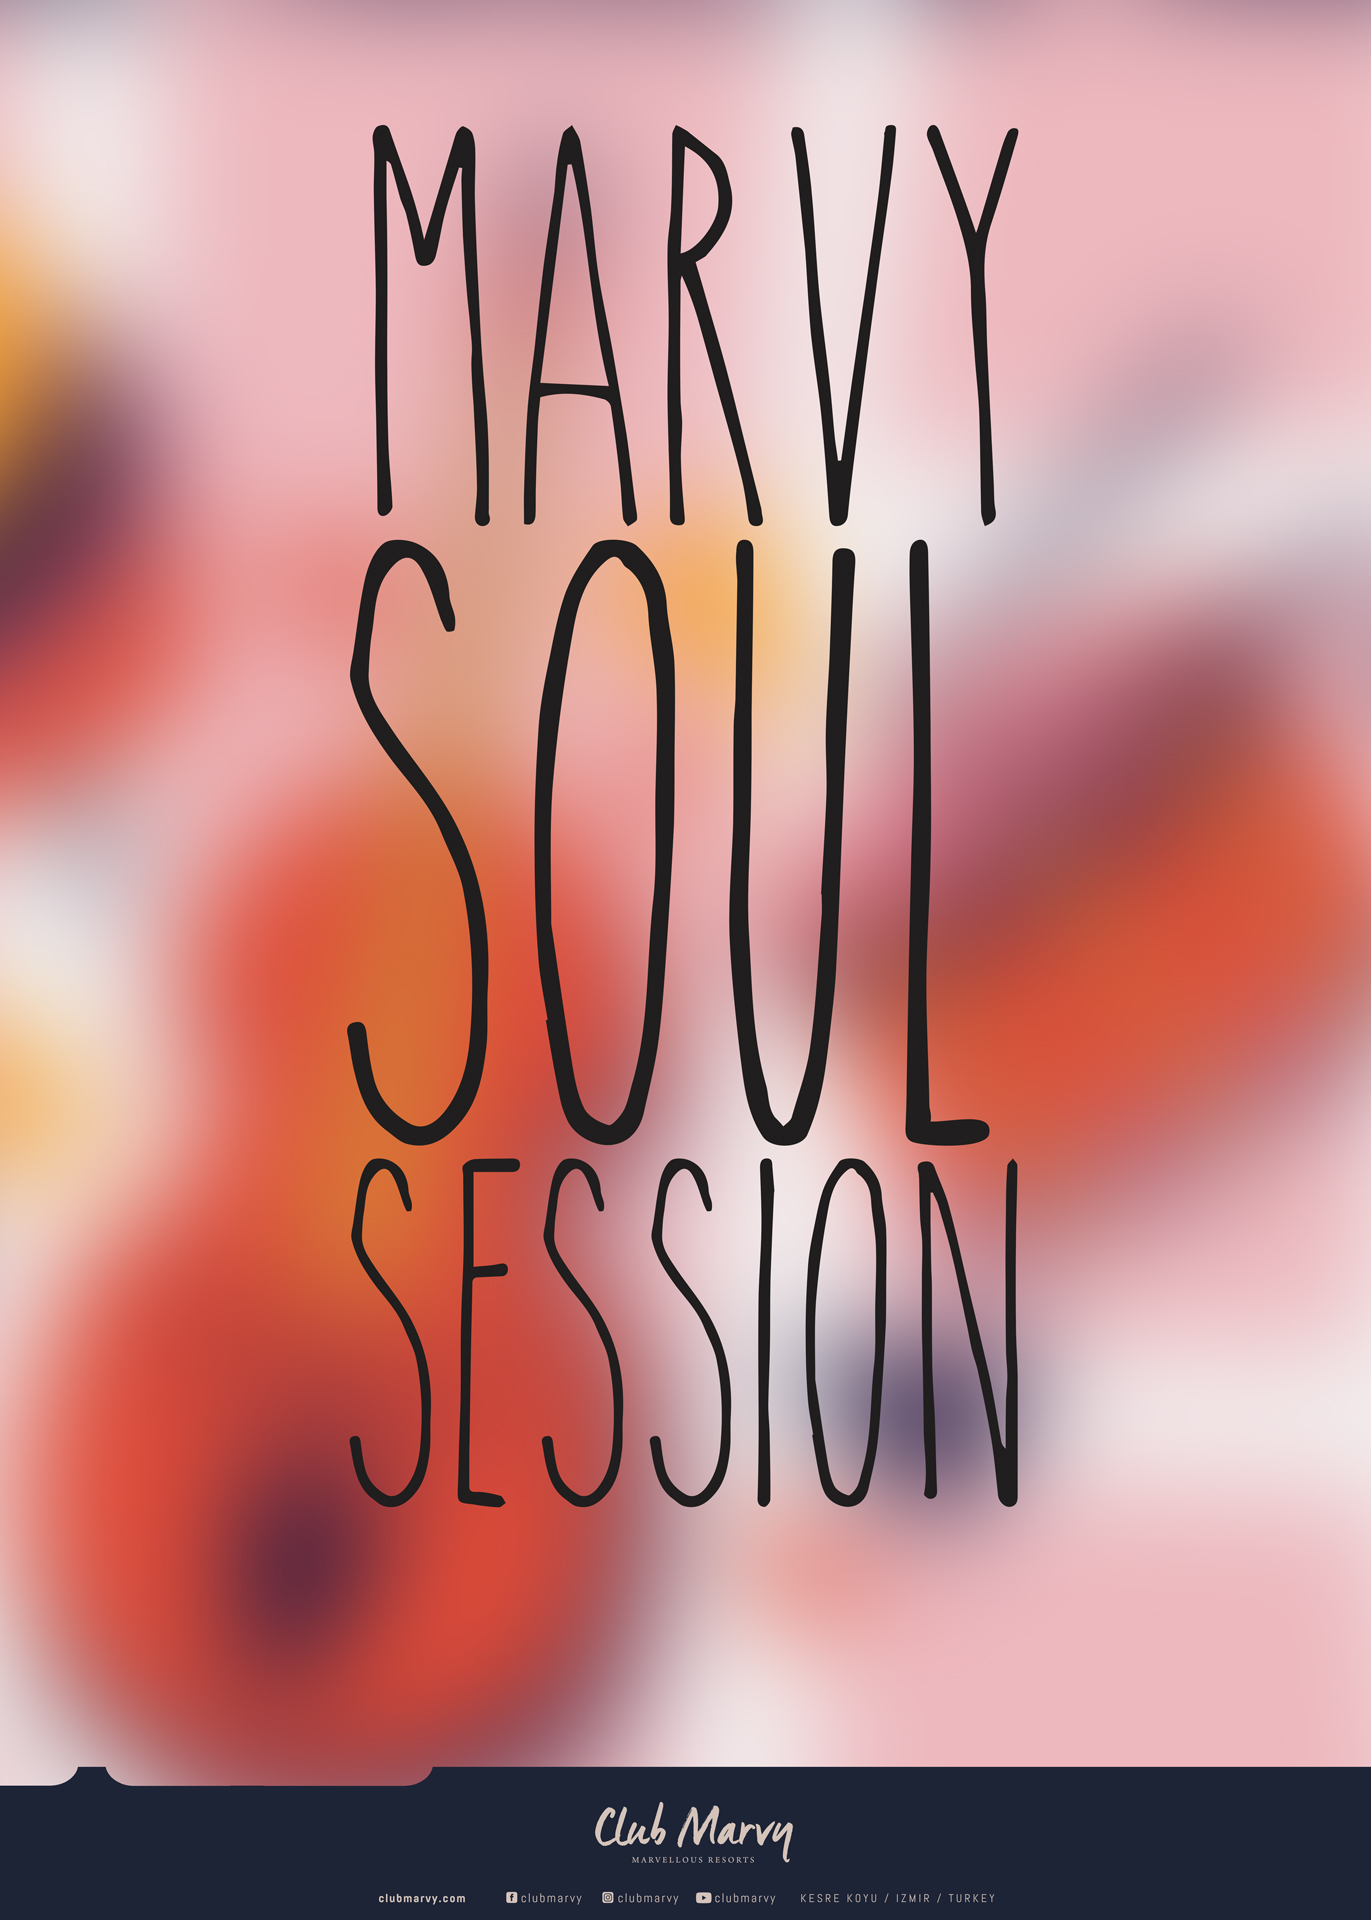 Marvy Soul Sessions